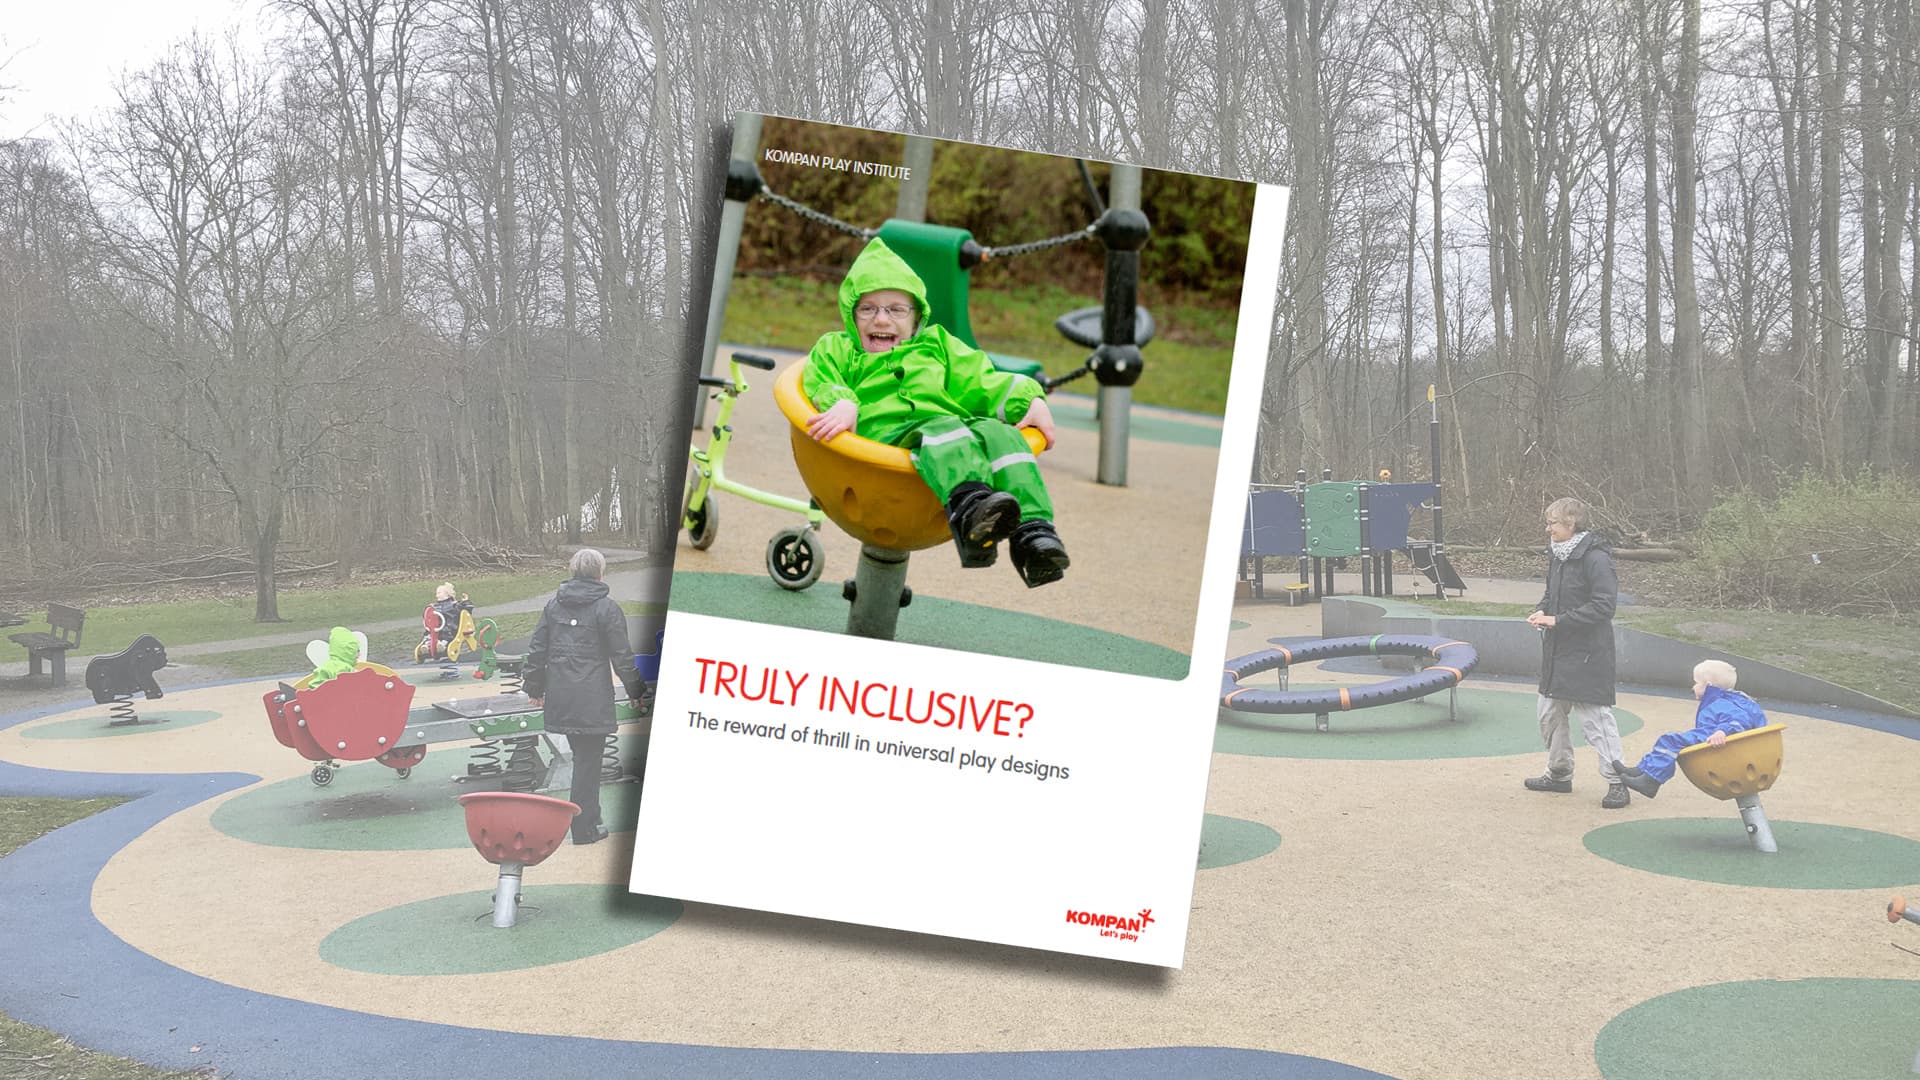 Children with disabilities also want thrilling play activities with friends